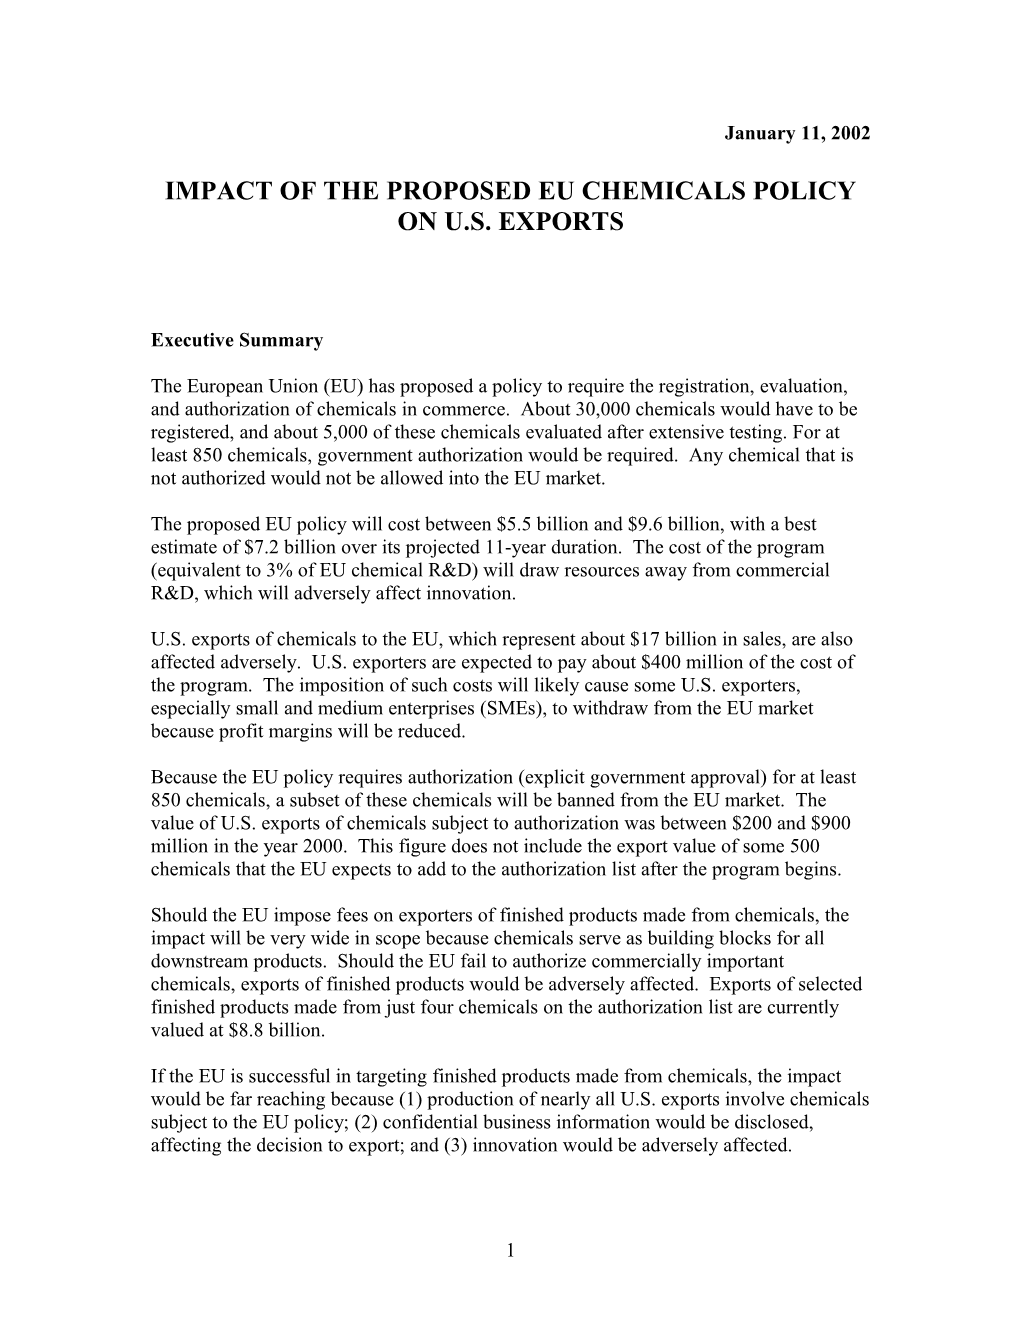 Impact of the Eu Proposed Chemicals Policy on Us Exports